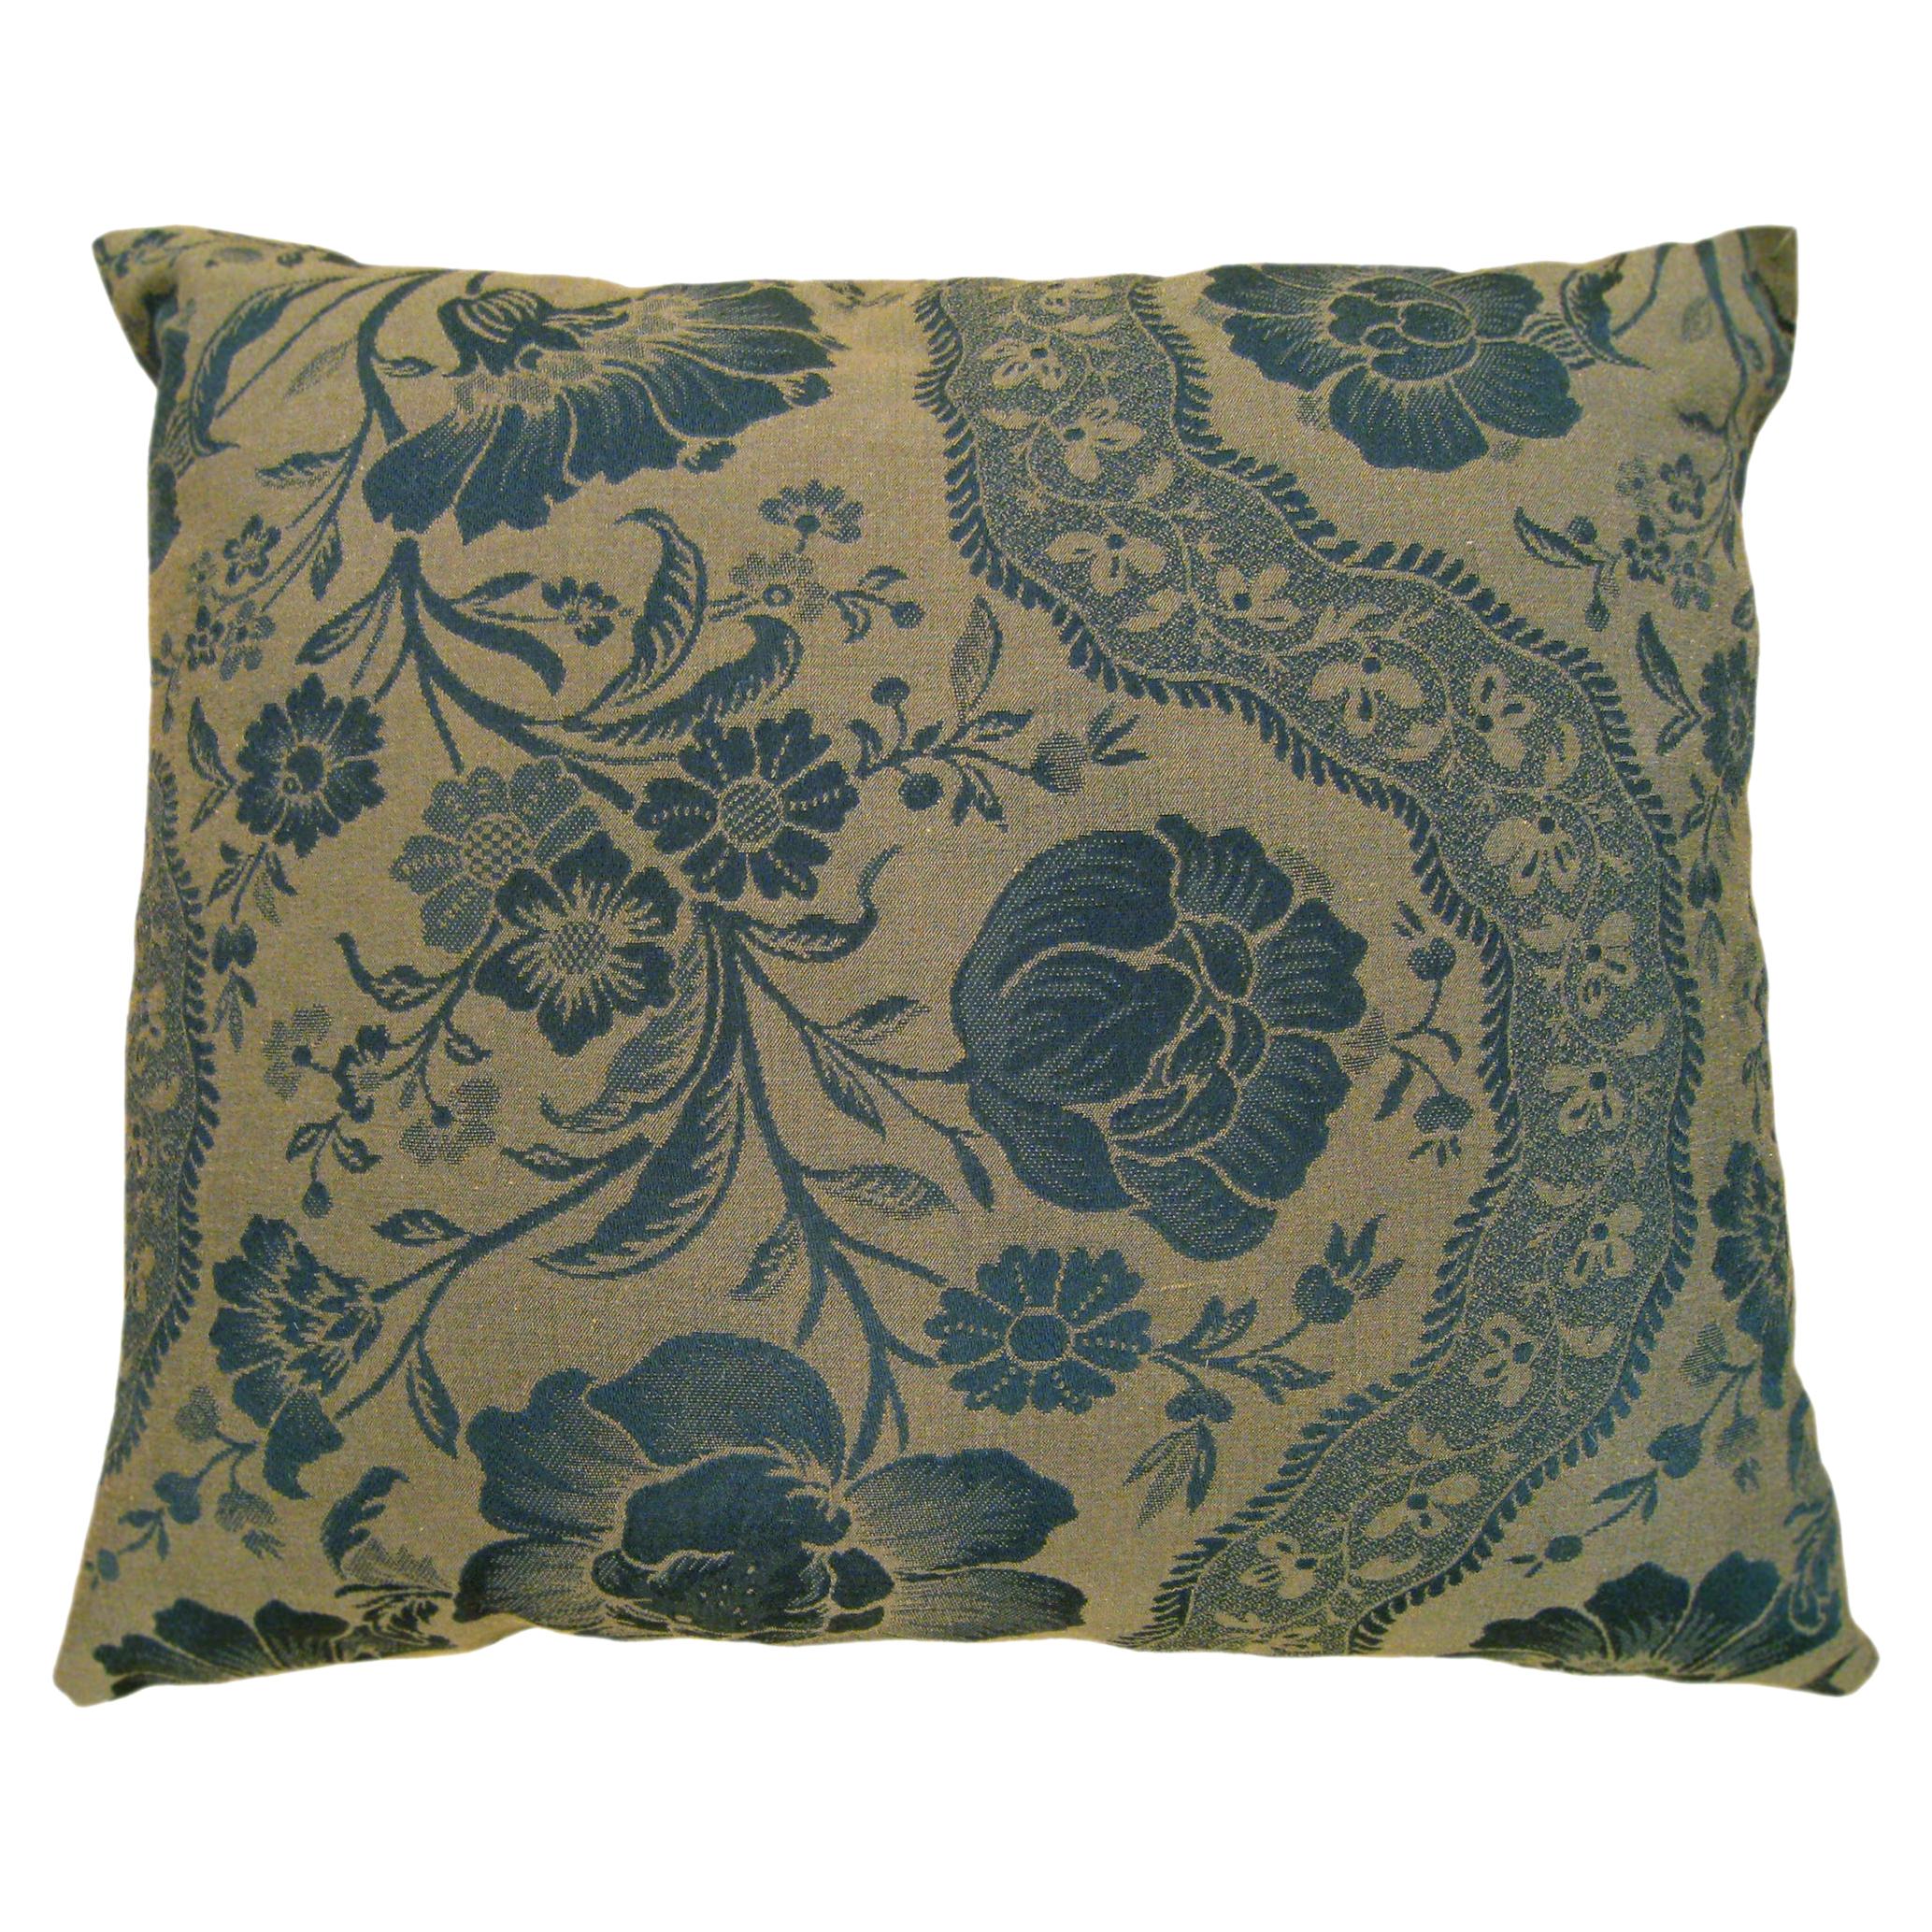 Vintage Decorative Pillow with Directional Floral Pattern